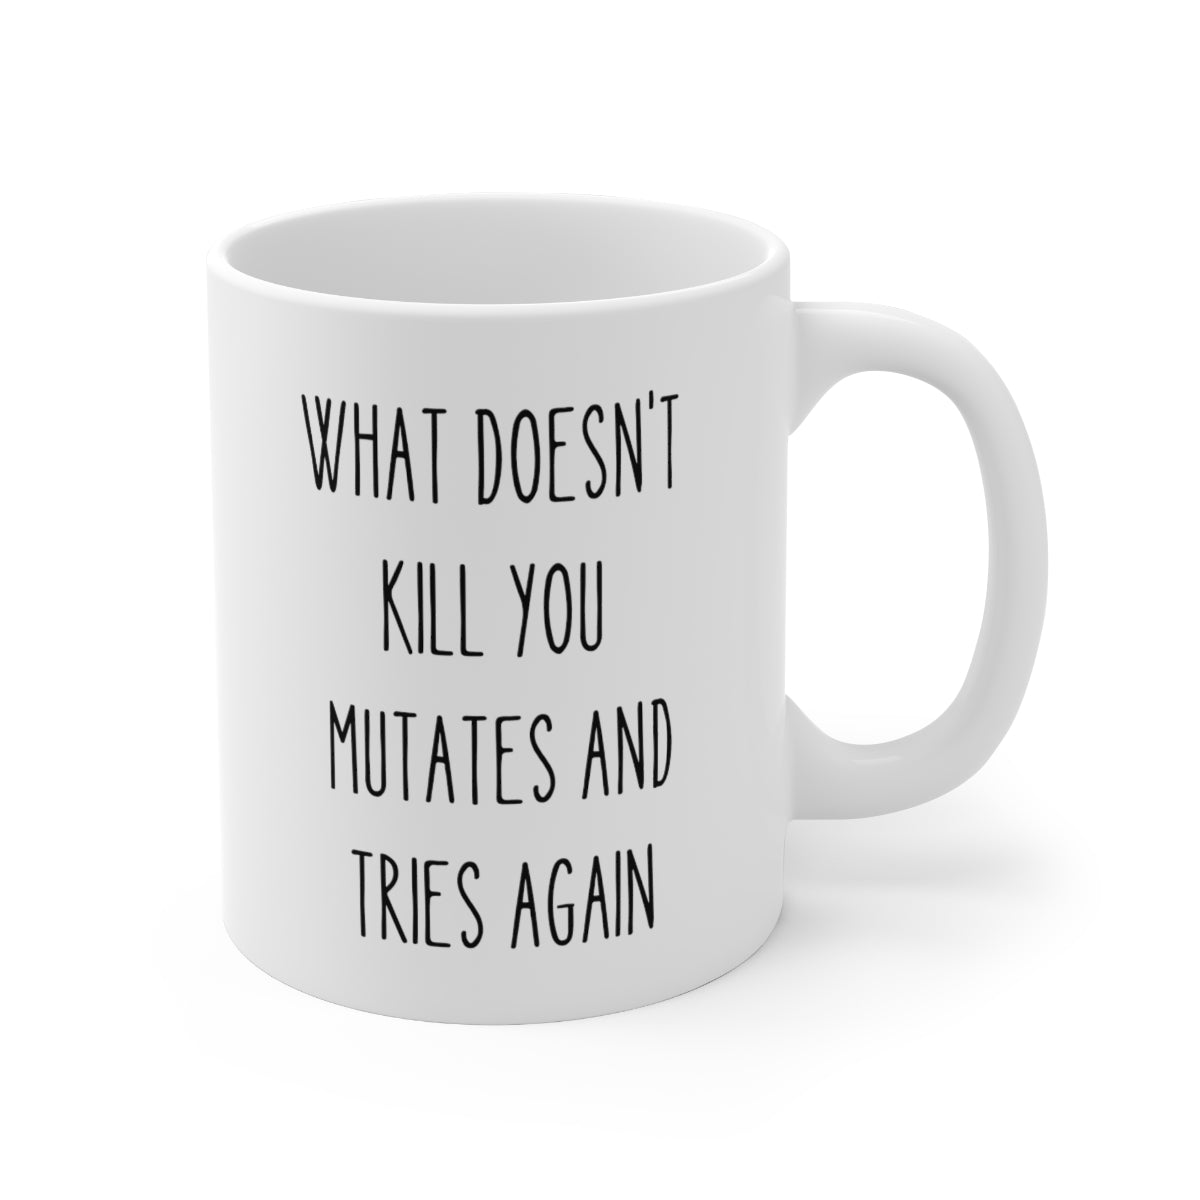 What Doesn't Kill You Mutates And Tries Again Funny Gift Mug